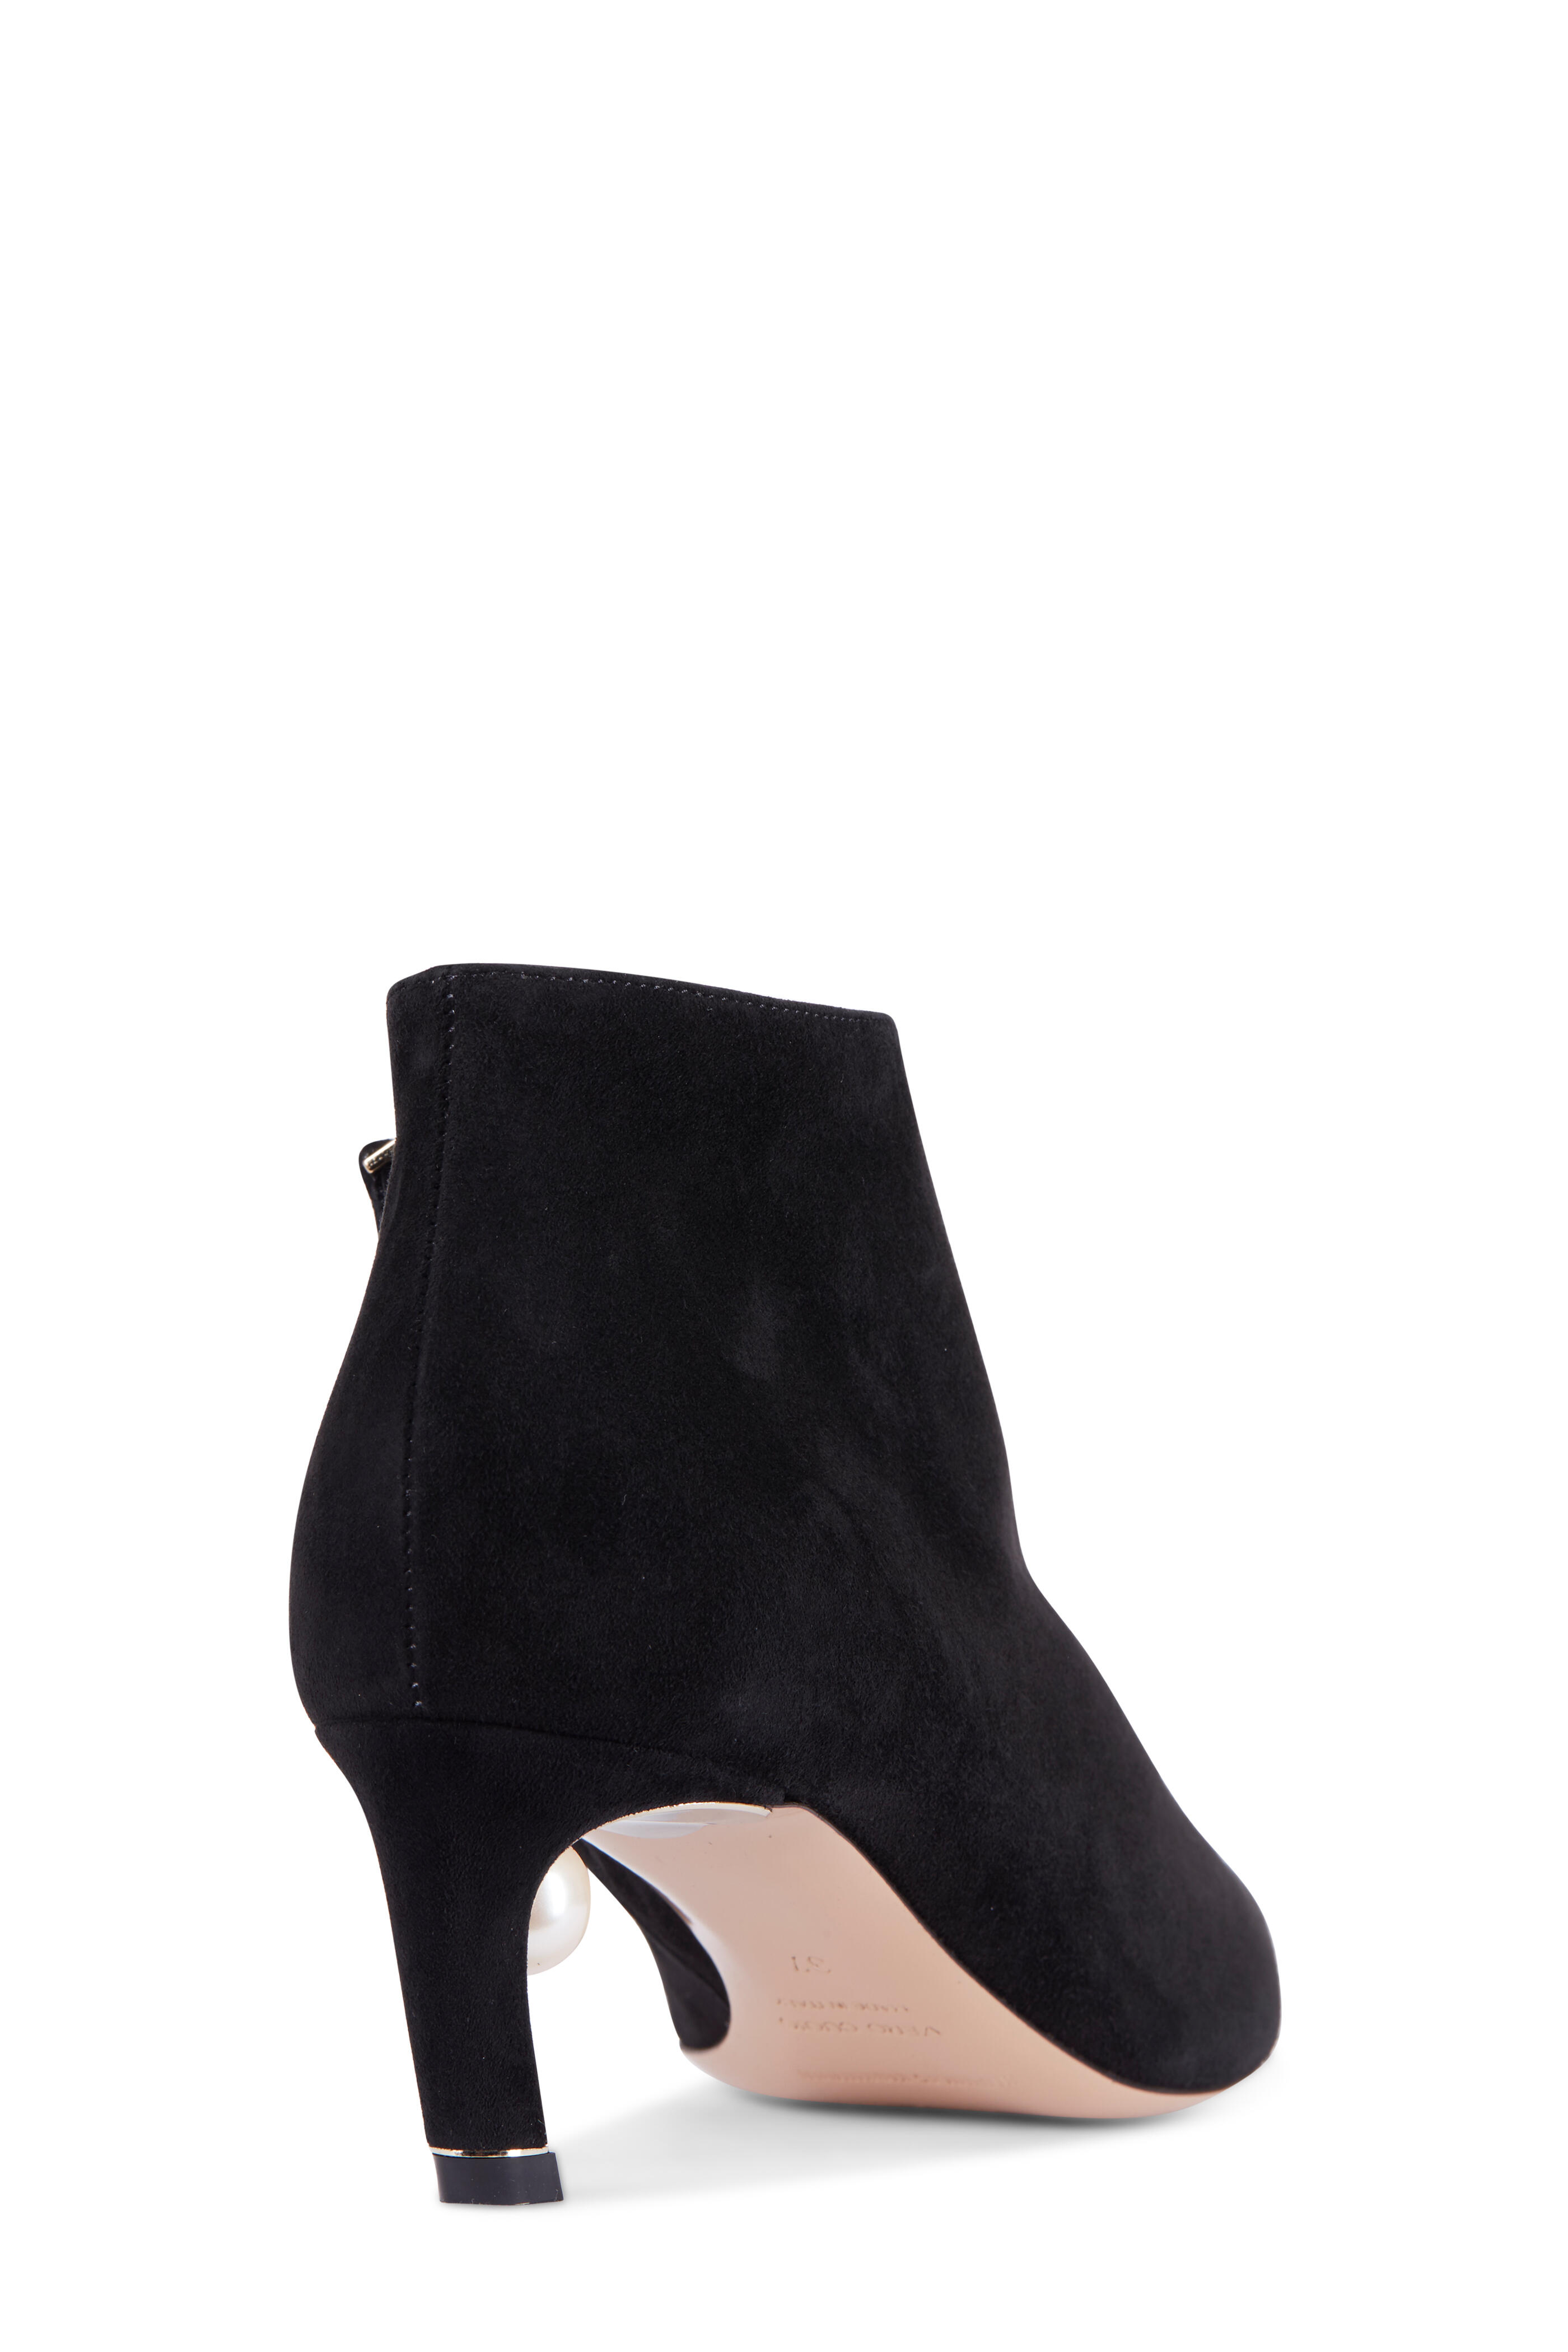 Nicholas Kirkwood + Shearling-trimmed Leather Ankle Boots